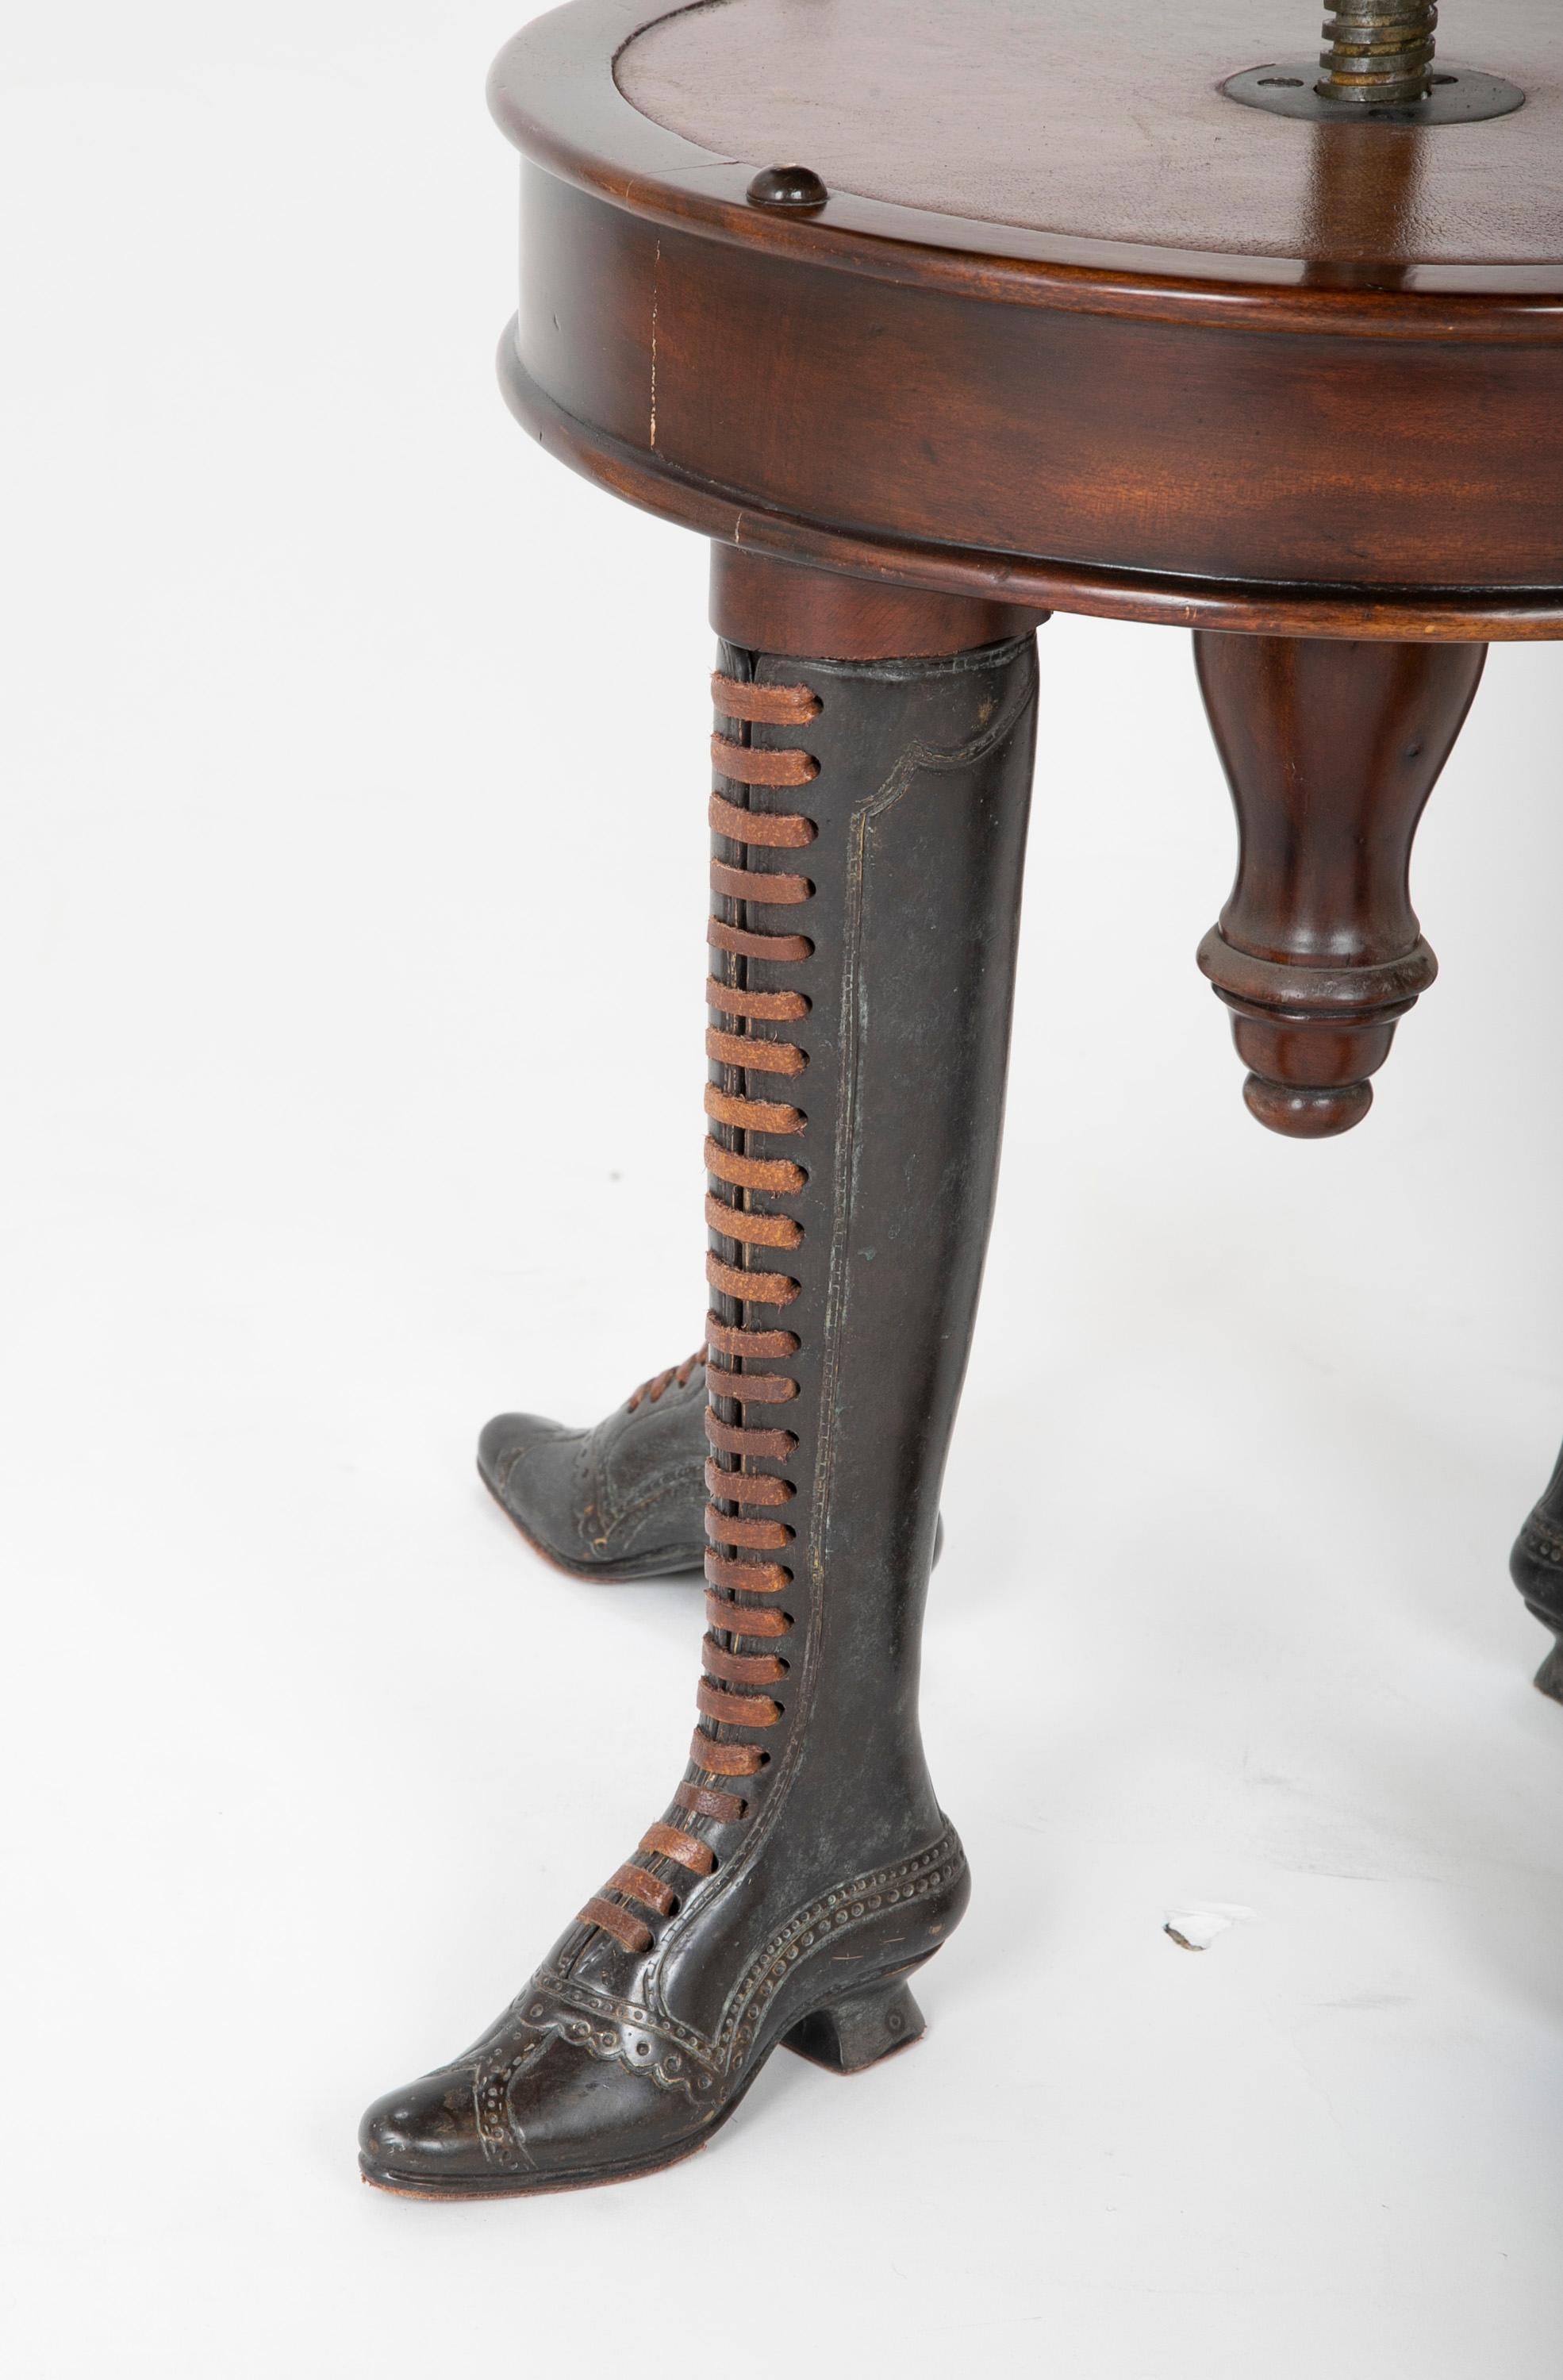 Edwardian Bronze Four Legged Adjustable Revolving Stool with Leather Upholstered Seat For Sale